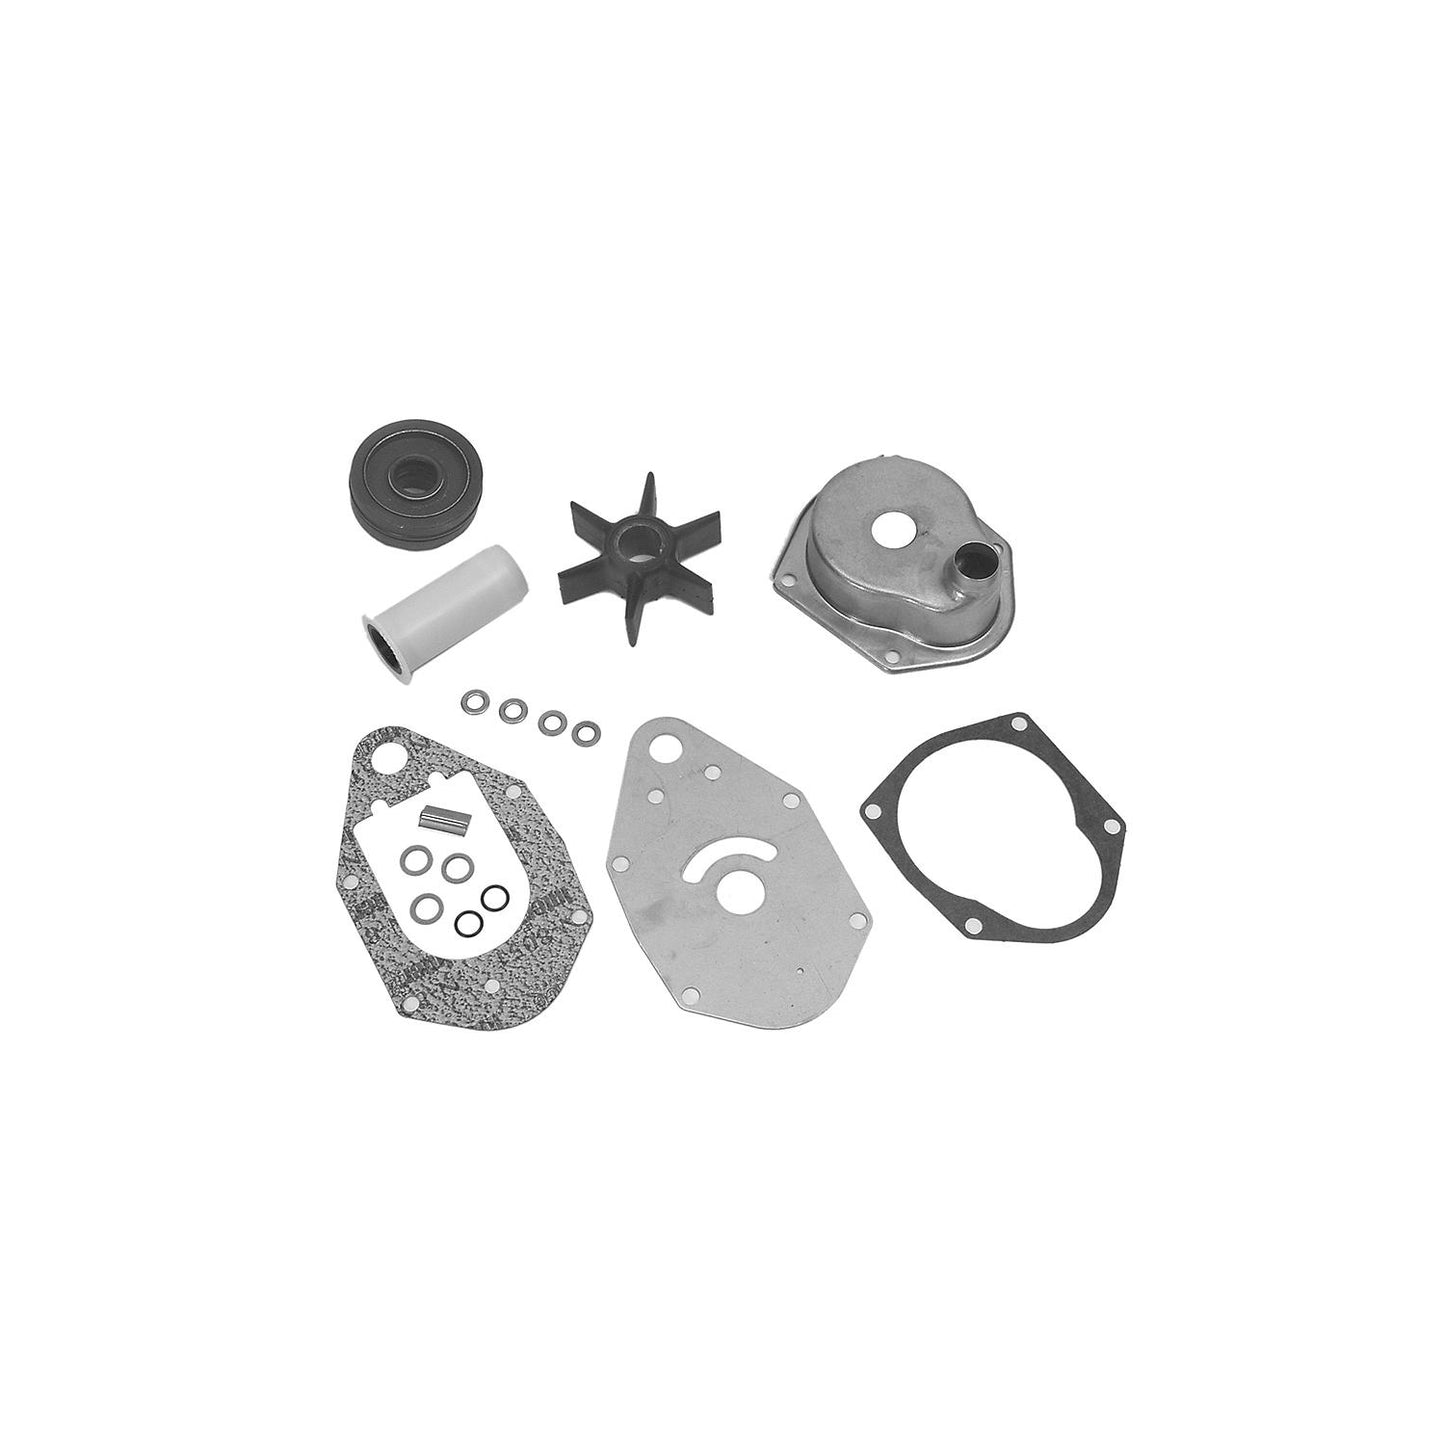 Quicksilver 812966A12 Water Pump Repair Kit for Mercury and Mariner 4-Stroke 30-60 HP Outboards